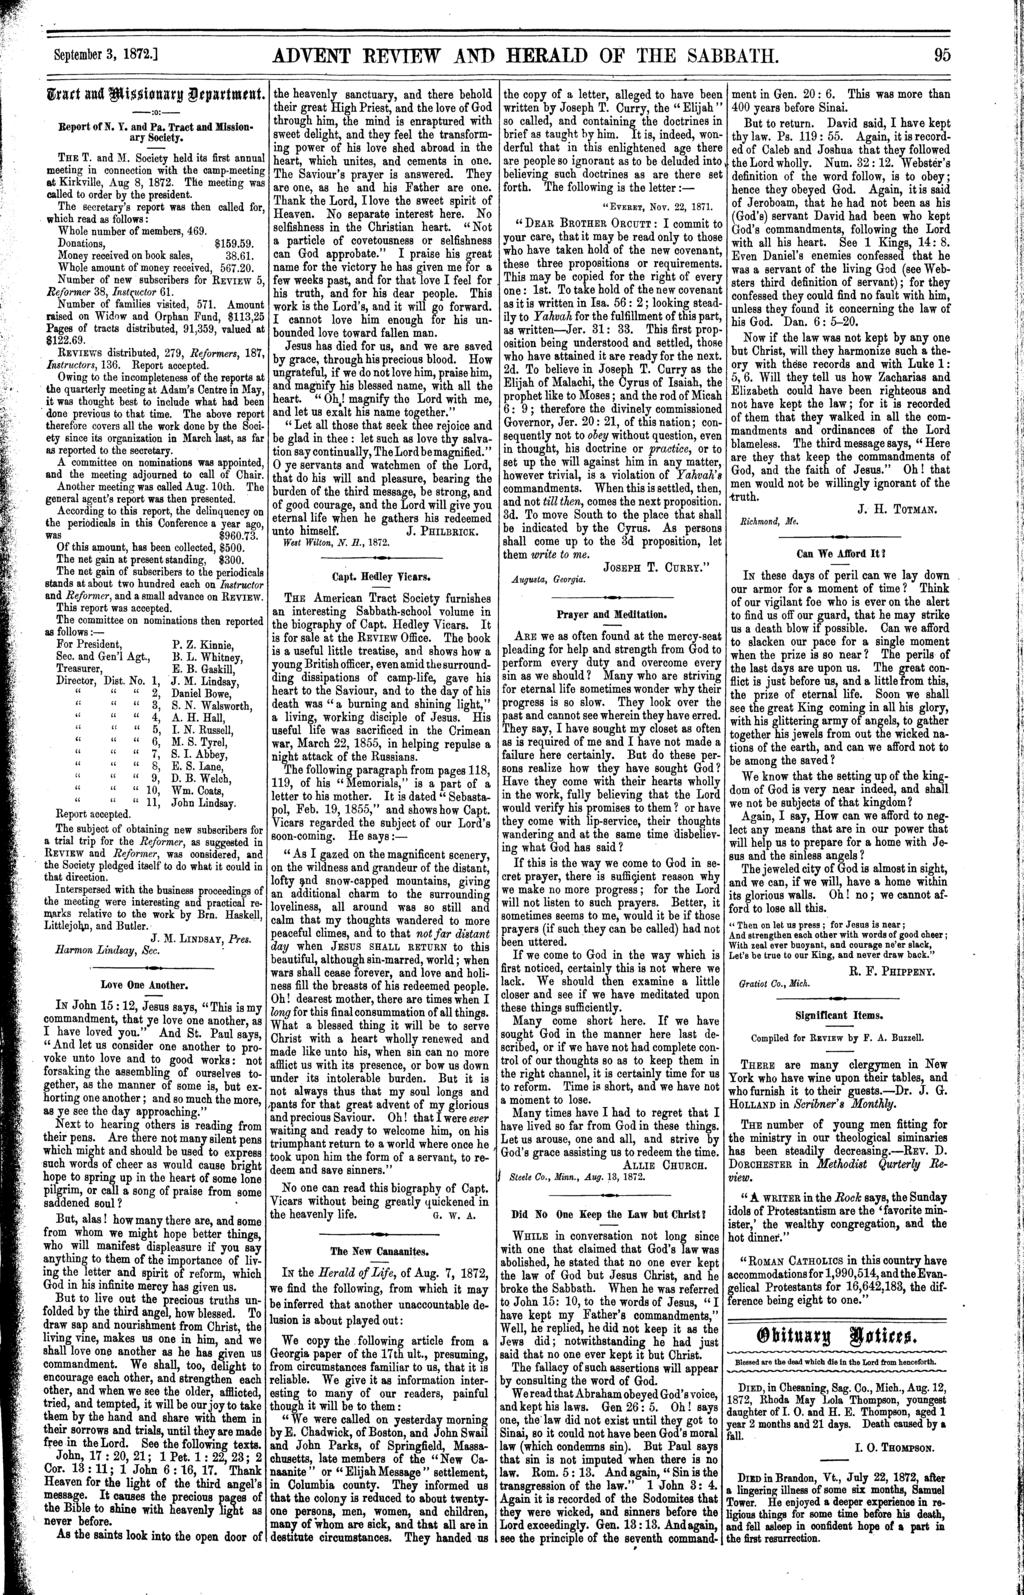 September 3, 872.] ADVENT REVIEW AND HERALD OF THE SABBATH. 95 iratt aua \i~snuny ~tpartmtut. -:o:- Report ofn. Y. an Pa. Tract an Mi